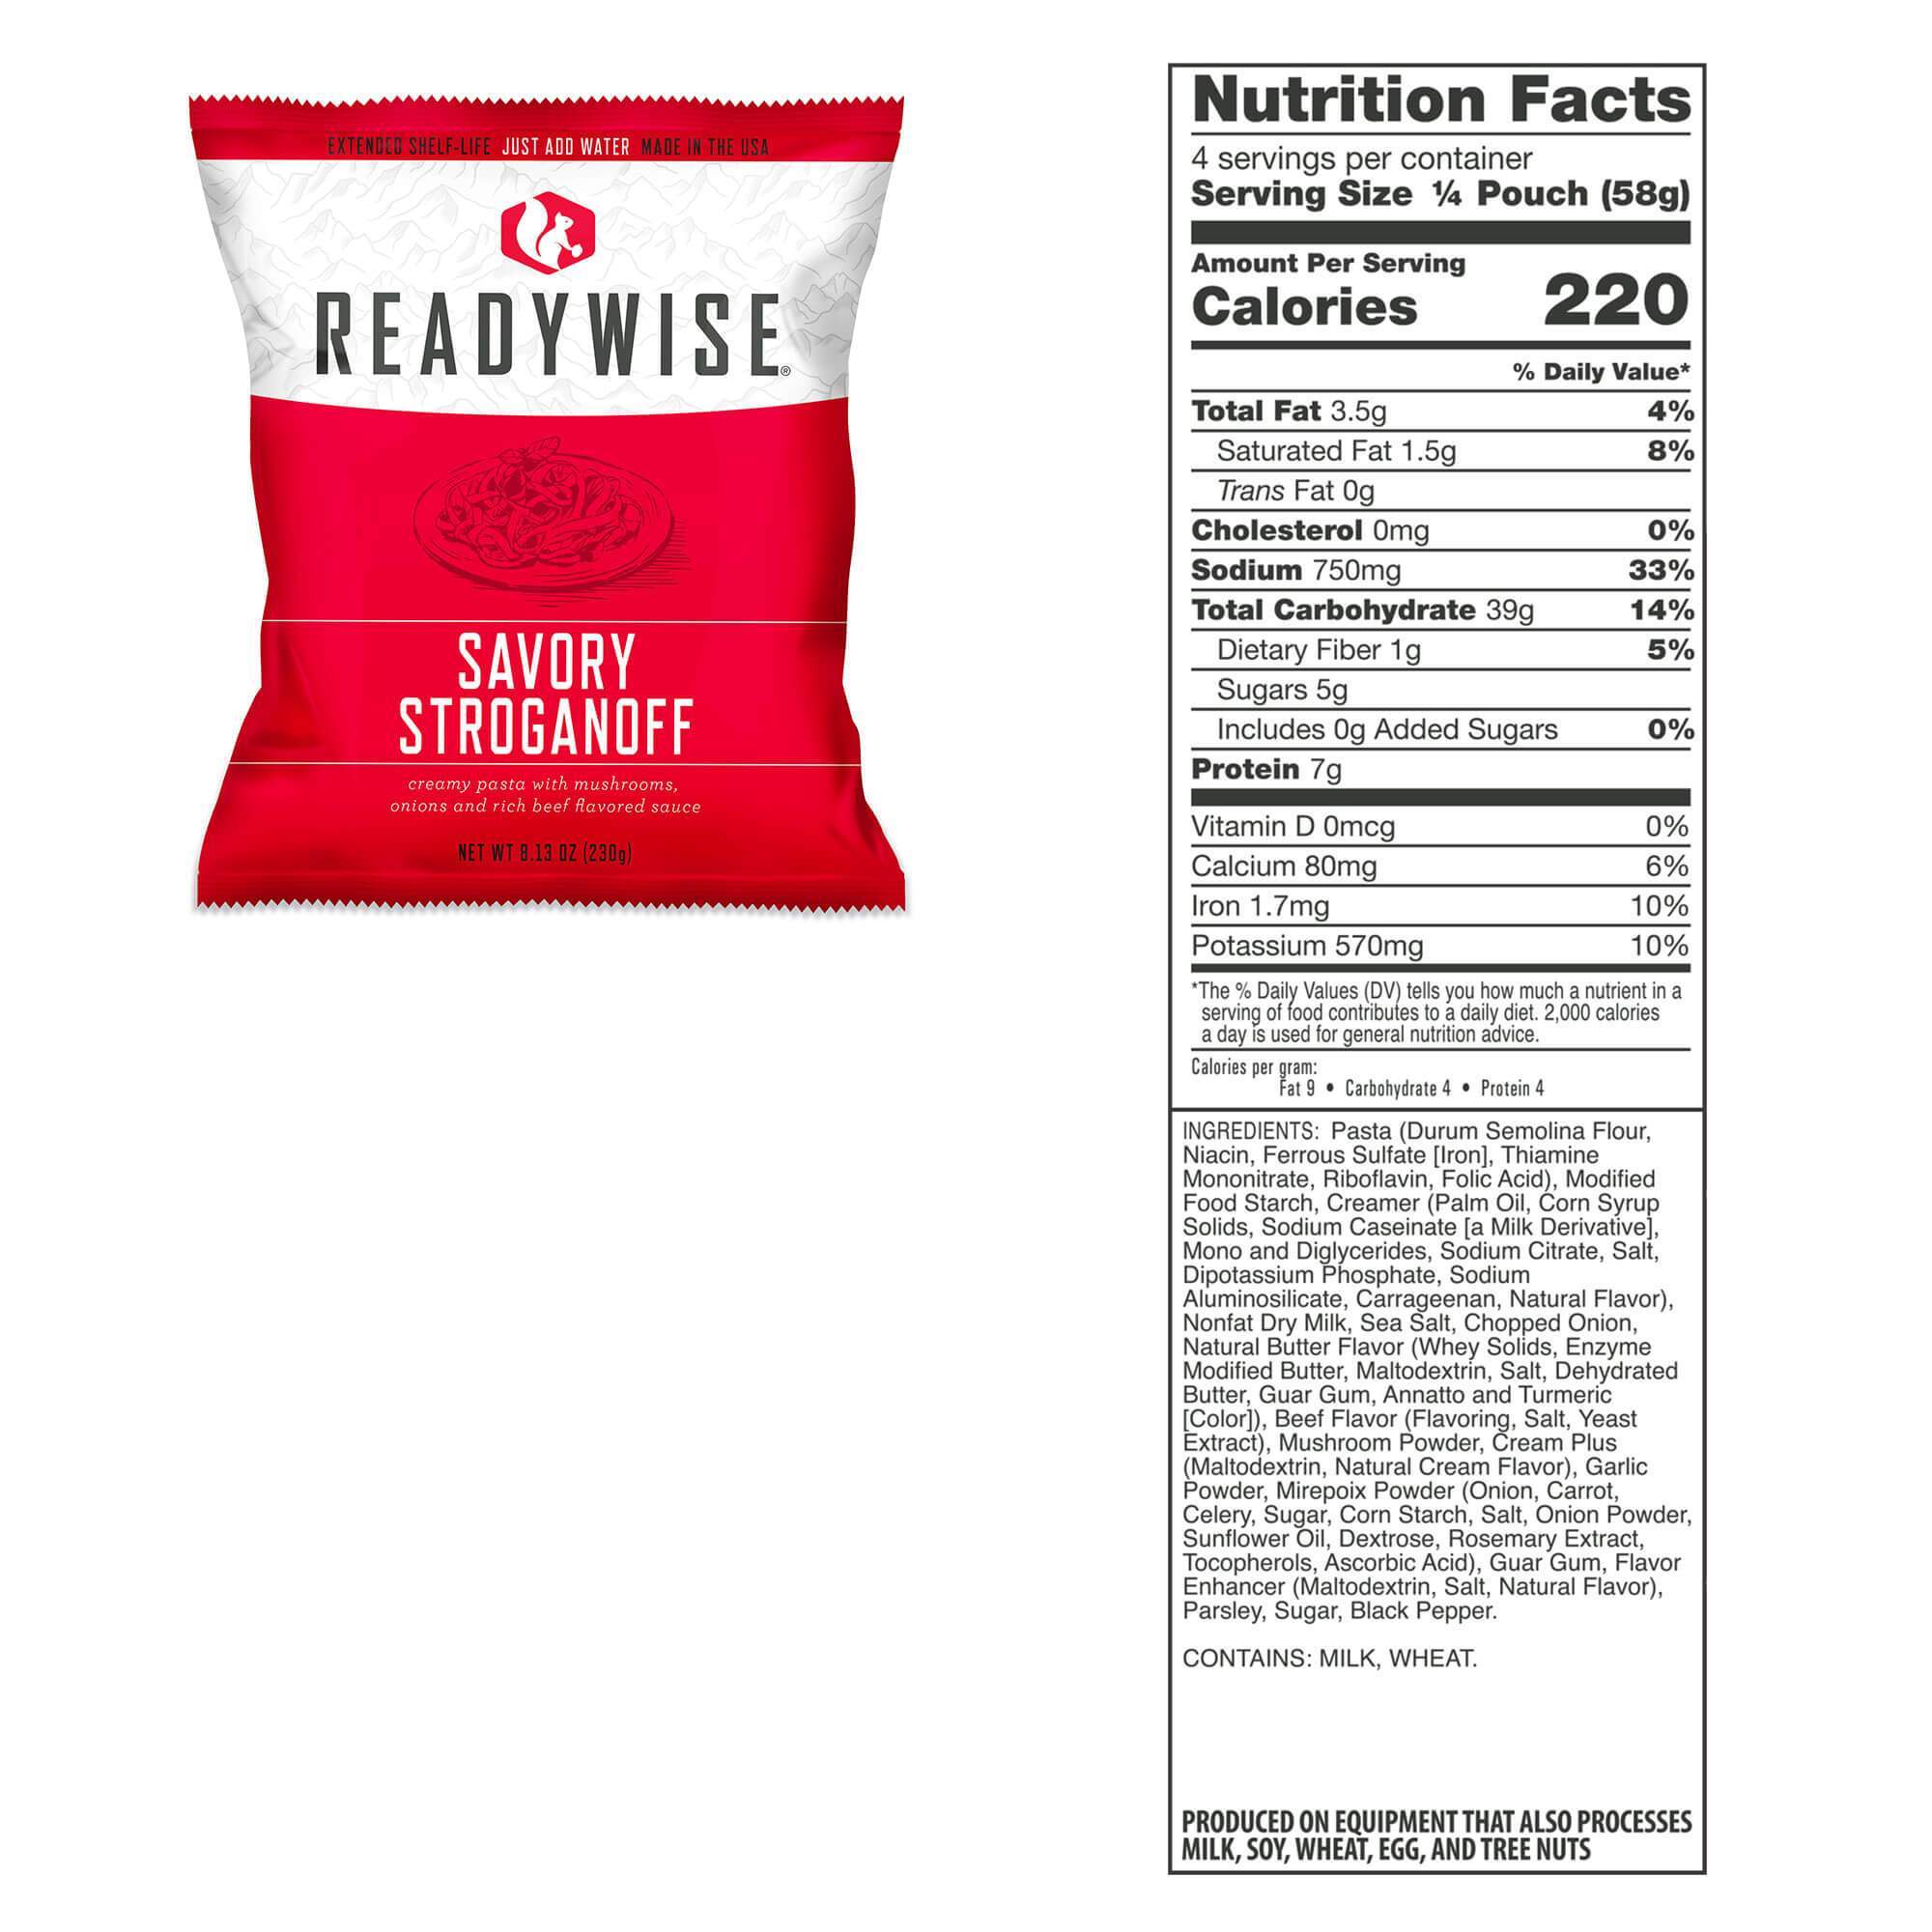 A bag of ReadyWise (formerly Wise Food Storage) 720 Servings of Ready Wise Emergency Survival Food Storage (SHIPS IN 1-2 WEEKS) savoy strawberry chips on a white background.